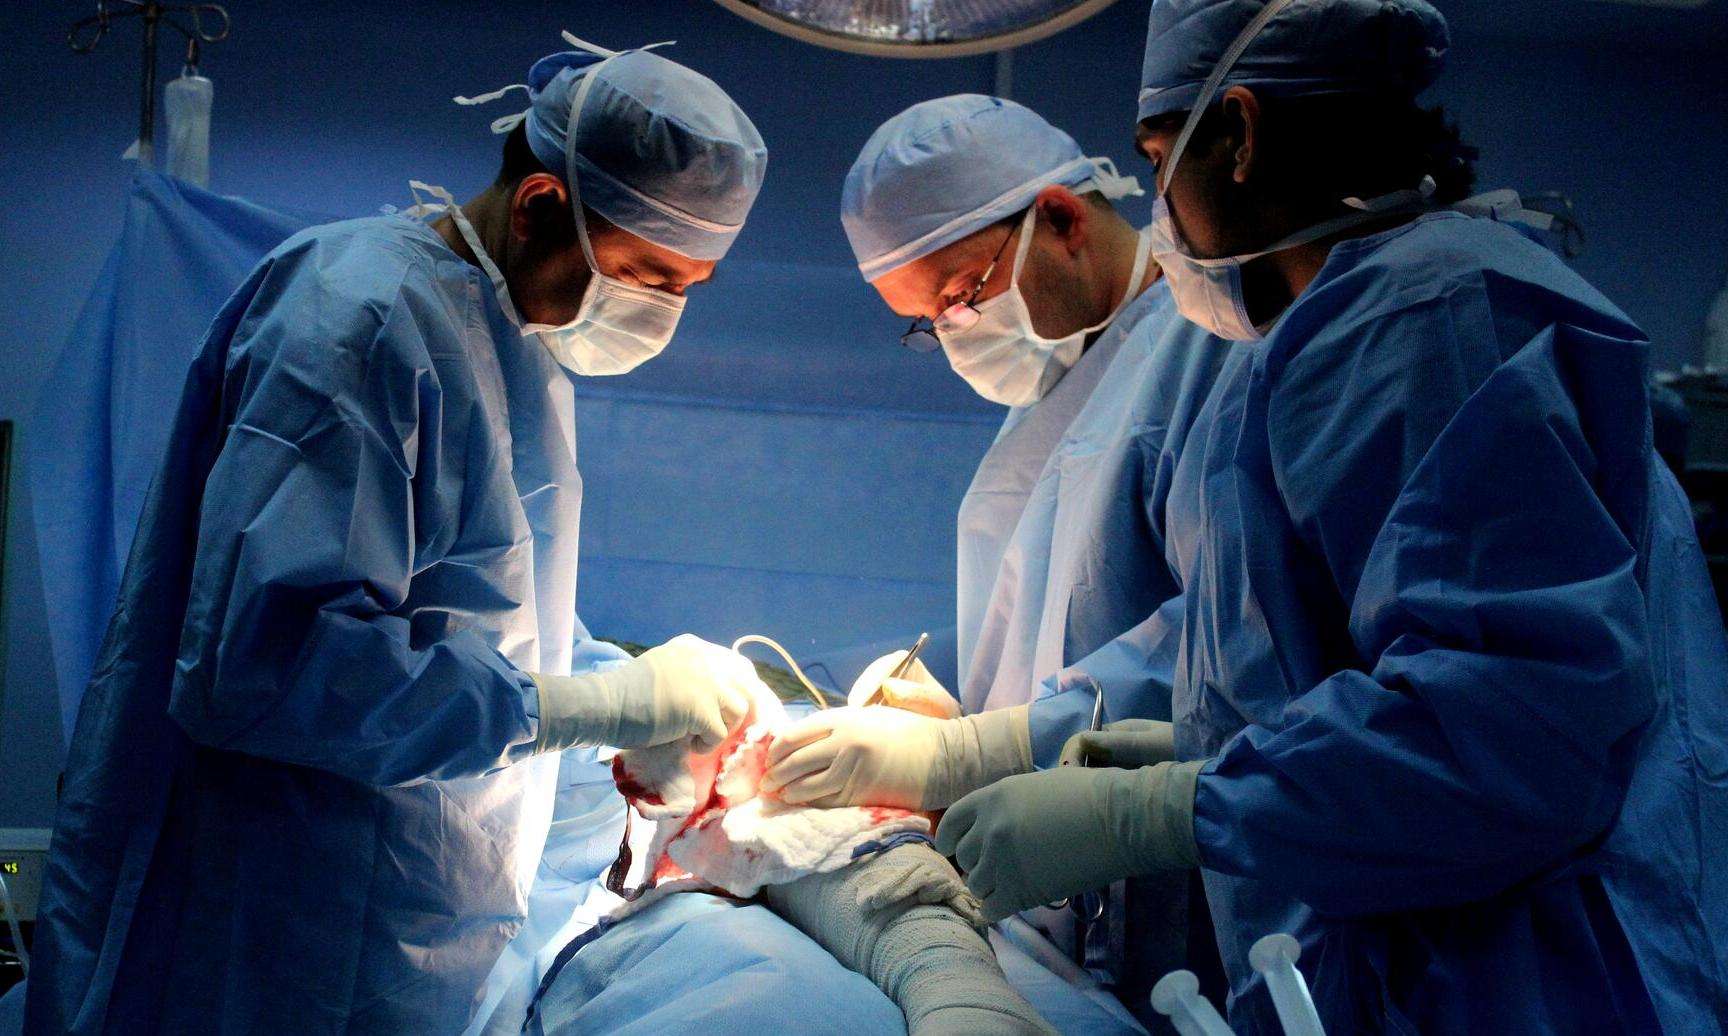 Dr. Rasheed Fakhri, an MSF surgeon, performs surgery with two colleagues in Amman, Jordan.